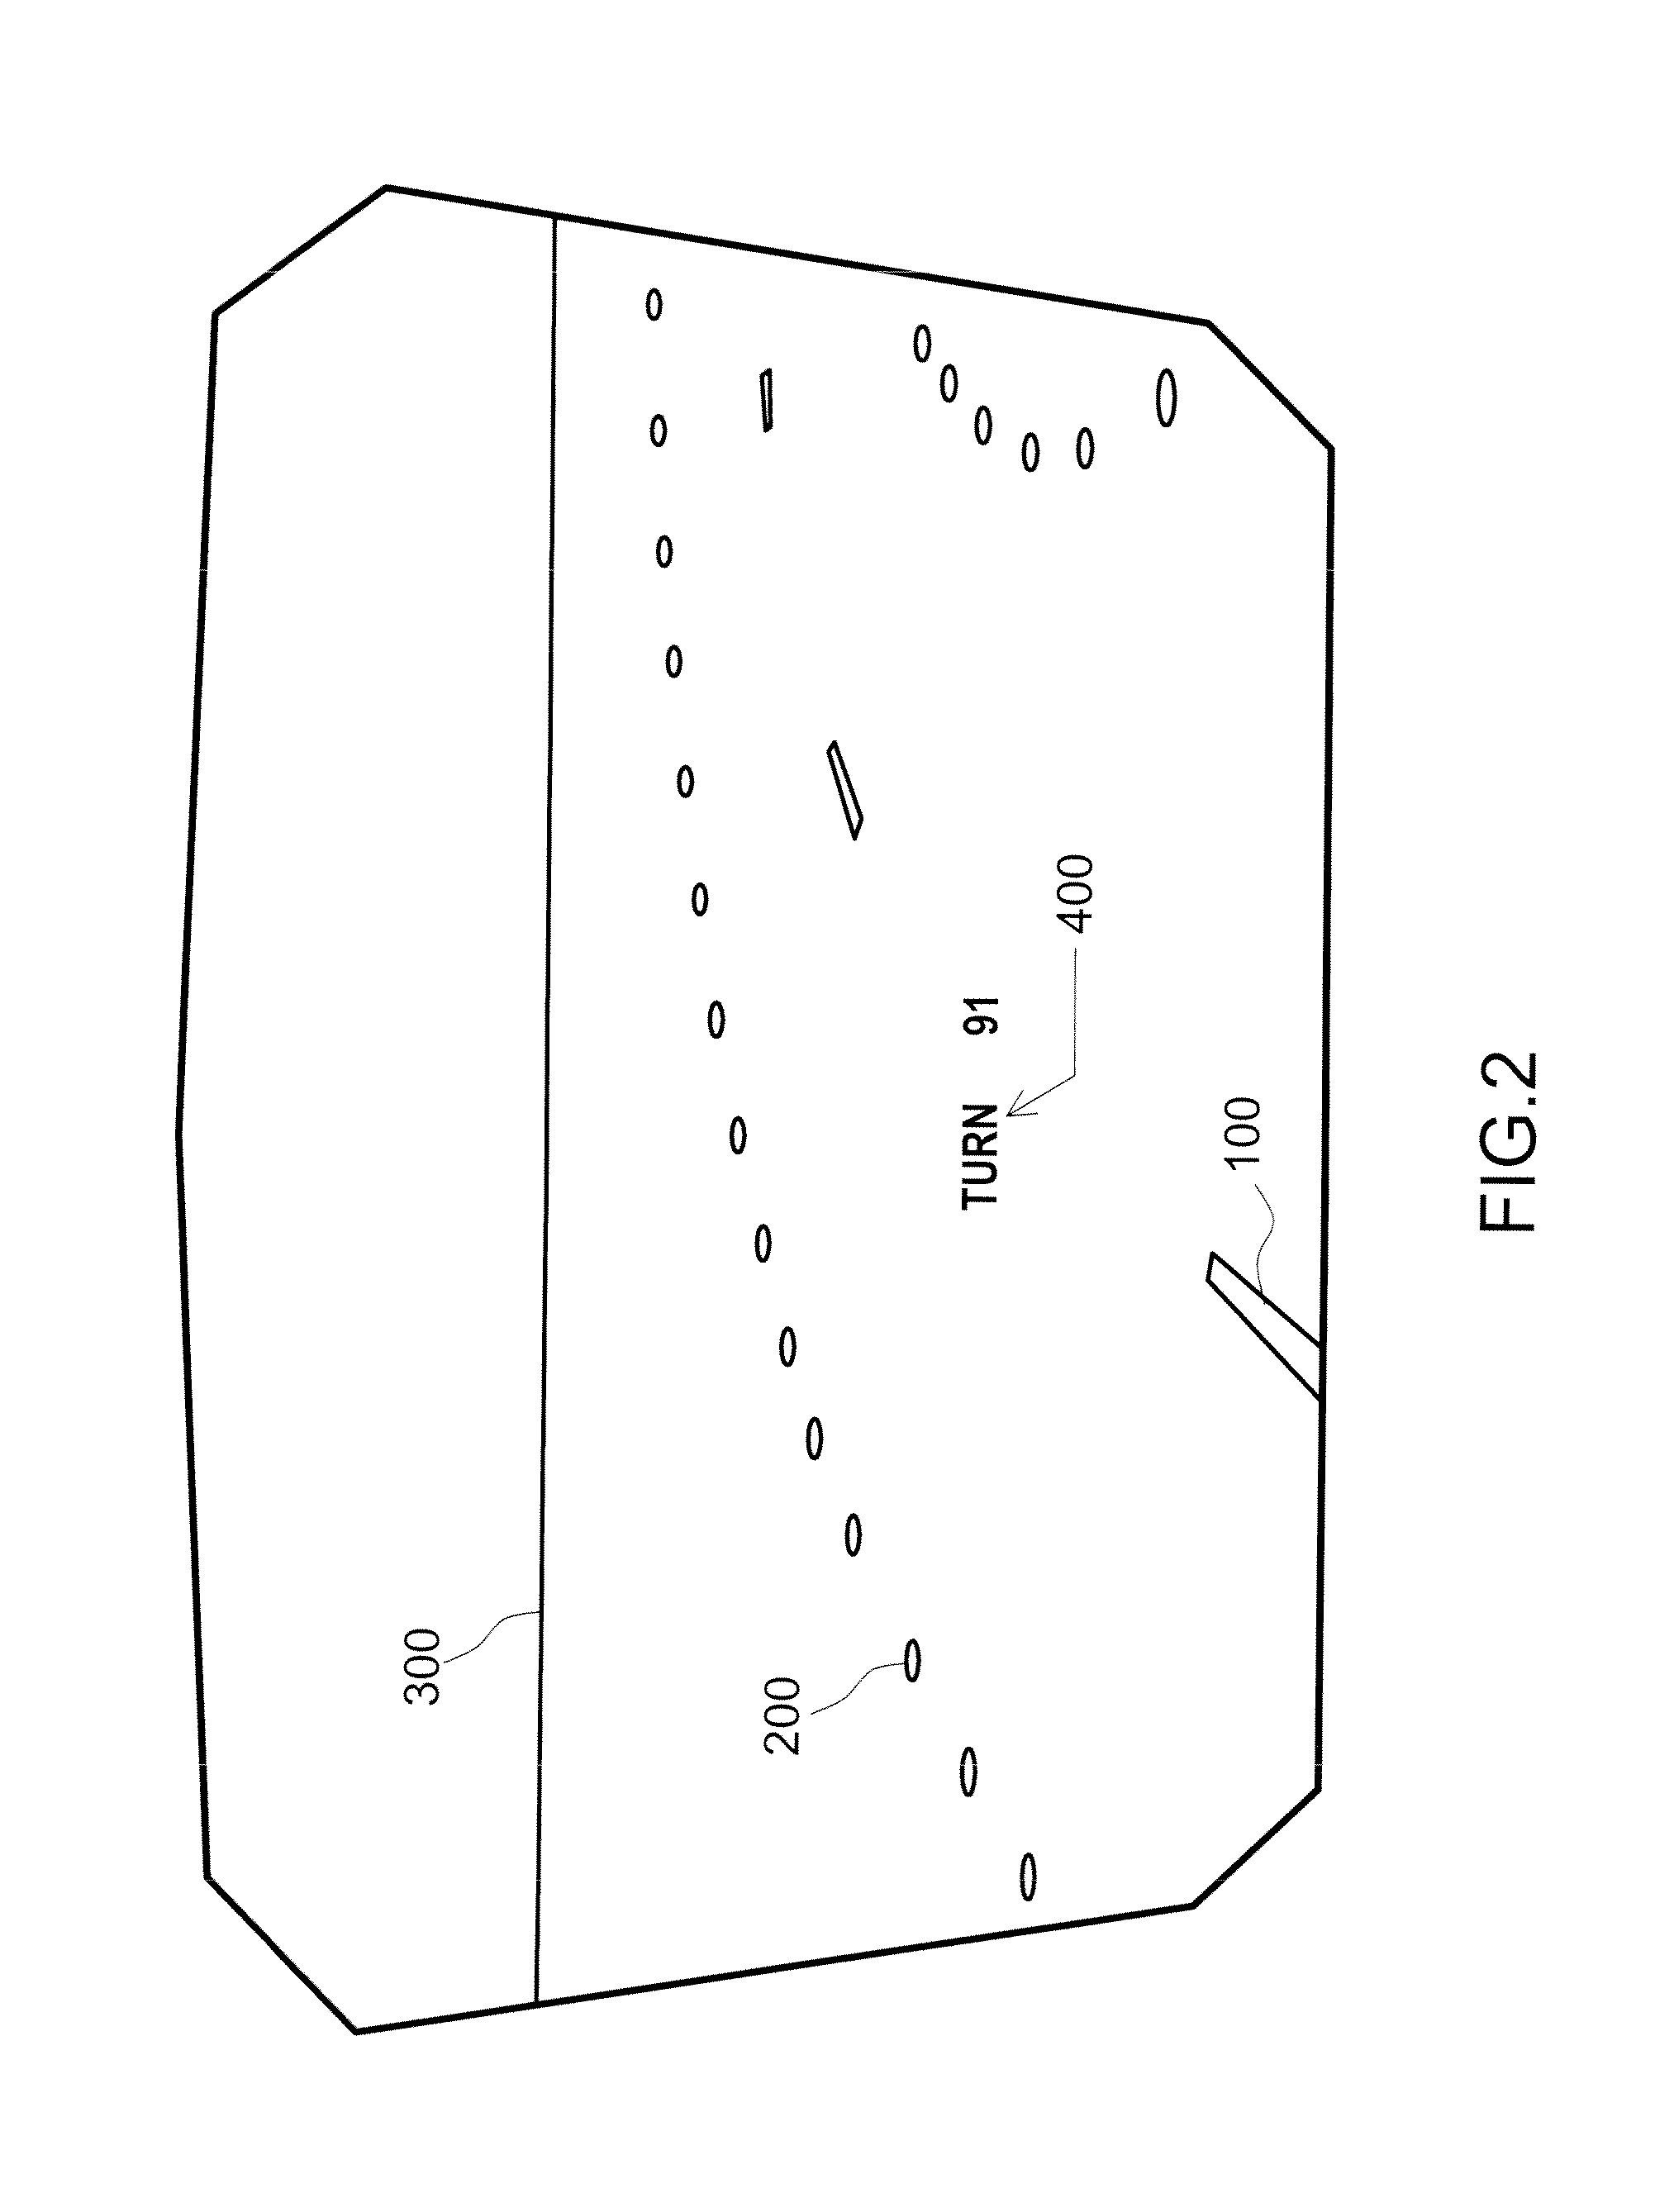 Optoelectronic Device for Assisting Aircraft Taxing Comprising Dedicated Imaging